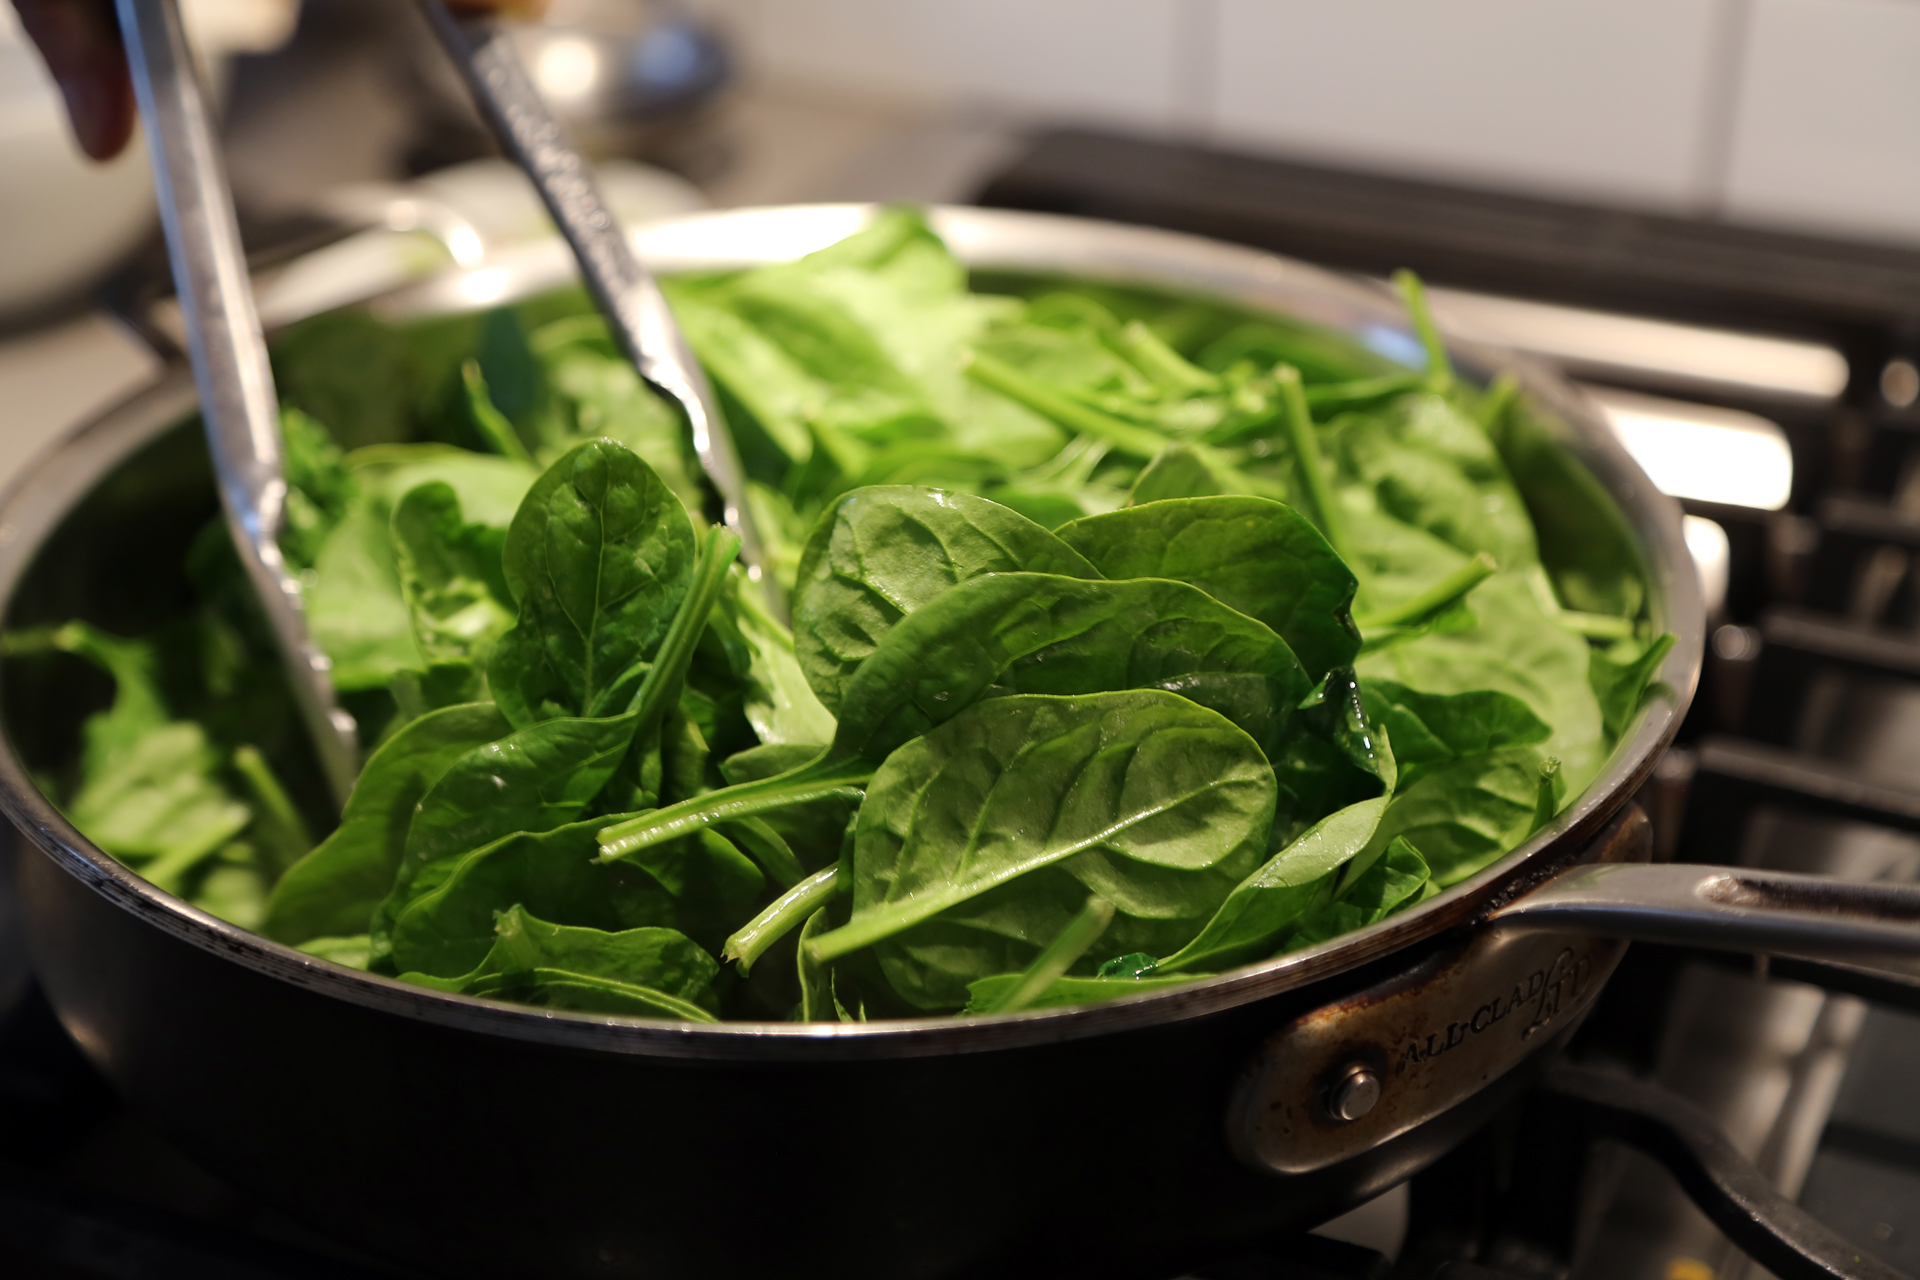 In a large frying pan or sauté pan over medium heat, melt 1/2 tablespoon of the butter. Add the spinach and cook, stirring often, just until barely wilted.